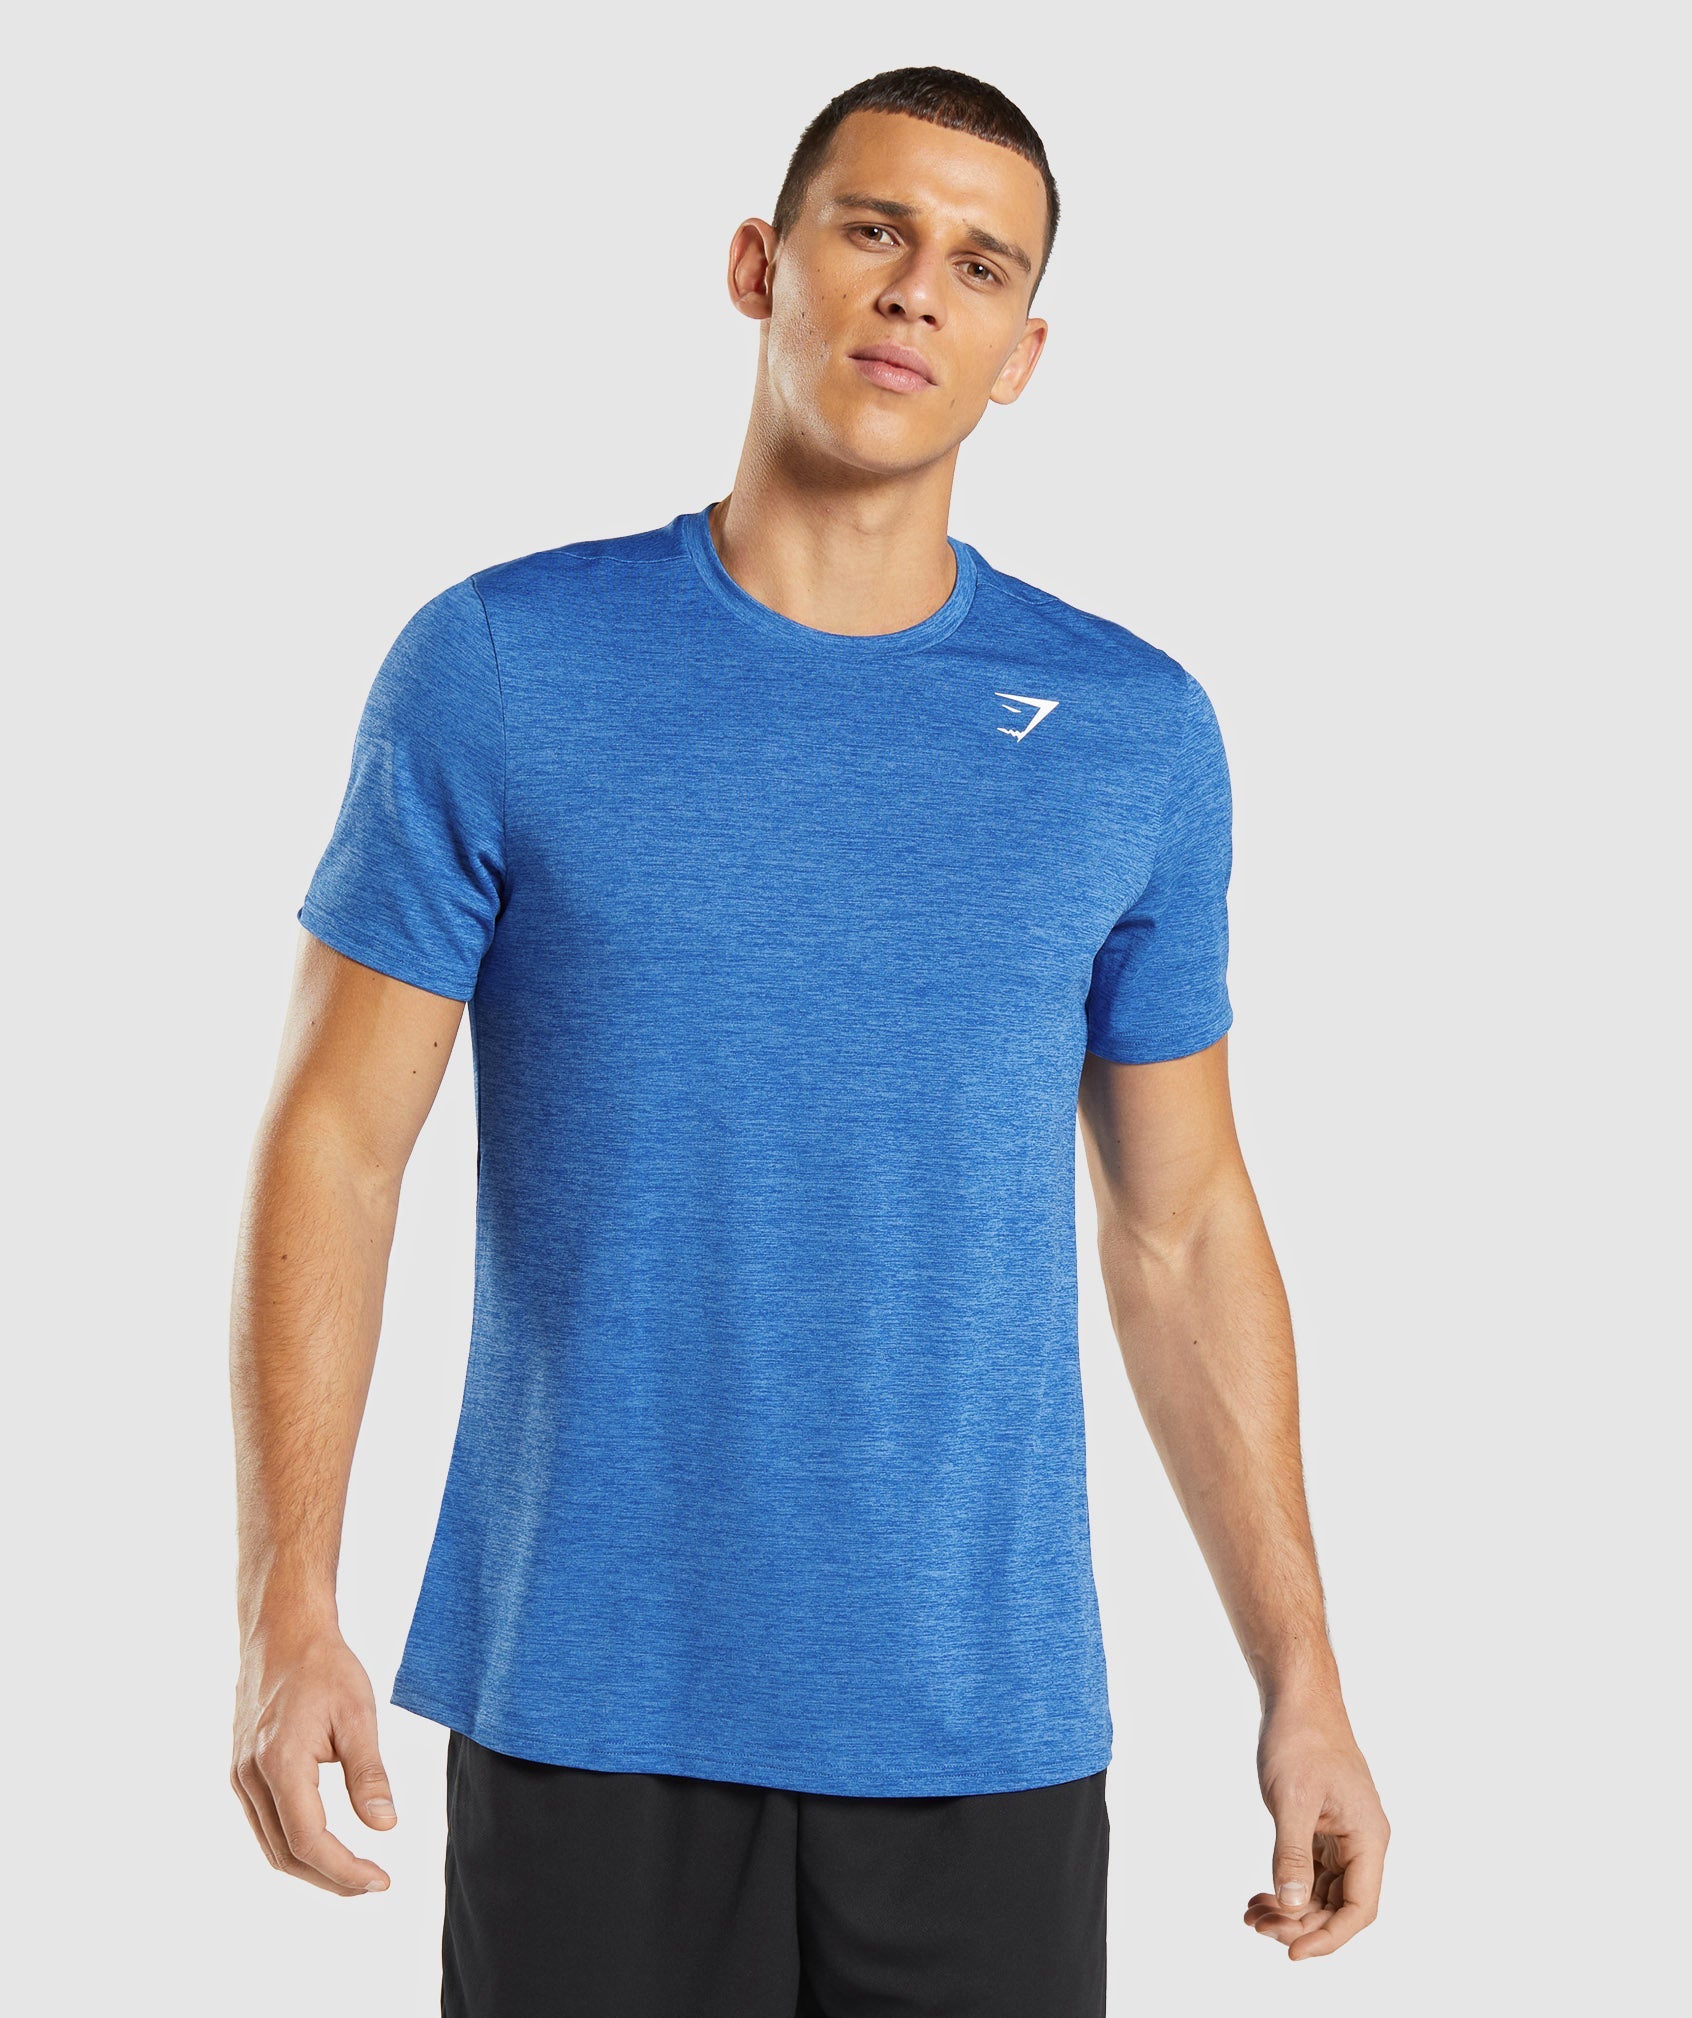 Arrival Marl T-Shirt in Athletic Blue/Javelin Blue Marl